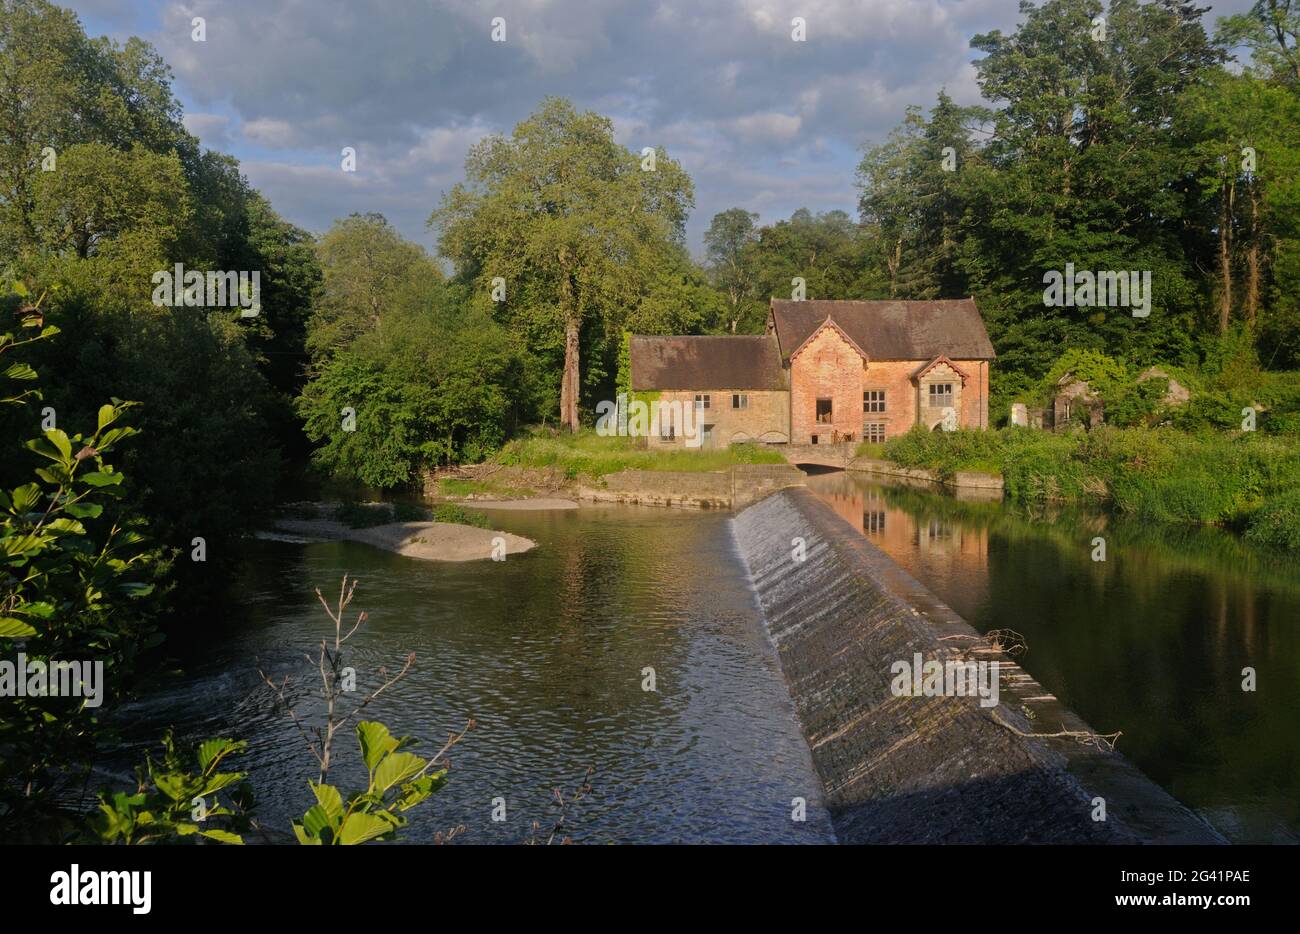 Derelict watermill on the River Teme at Bromfield, Shropshire, England Stock Photo